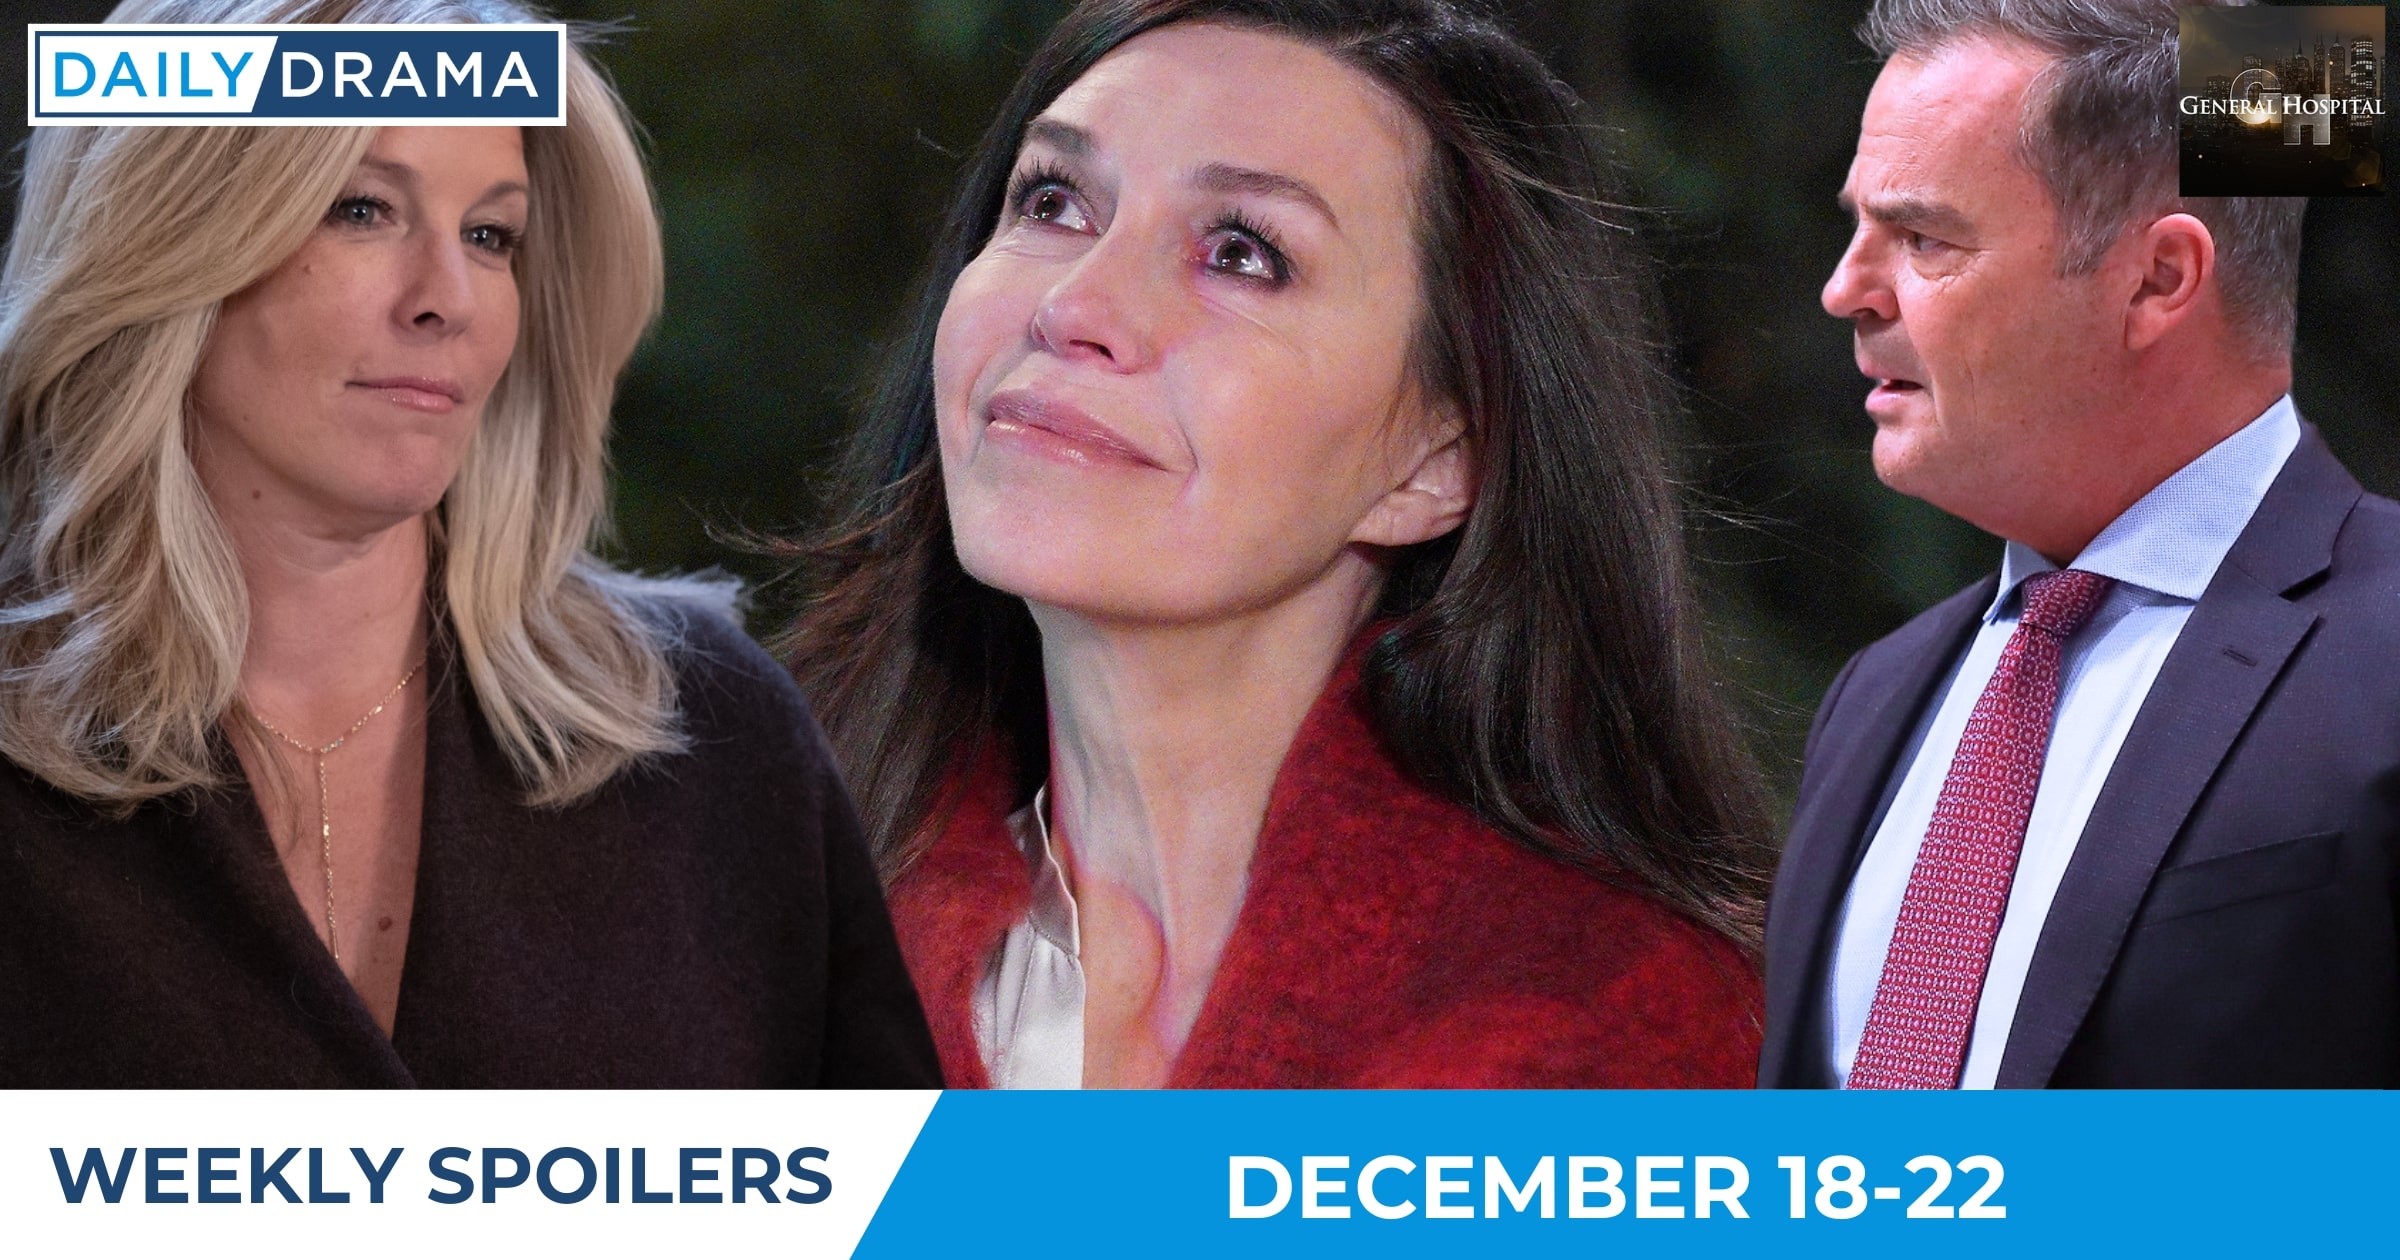 General Hospital Weekly Spoilers - Dec 18-22 - Carly Anna and Ned